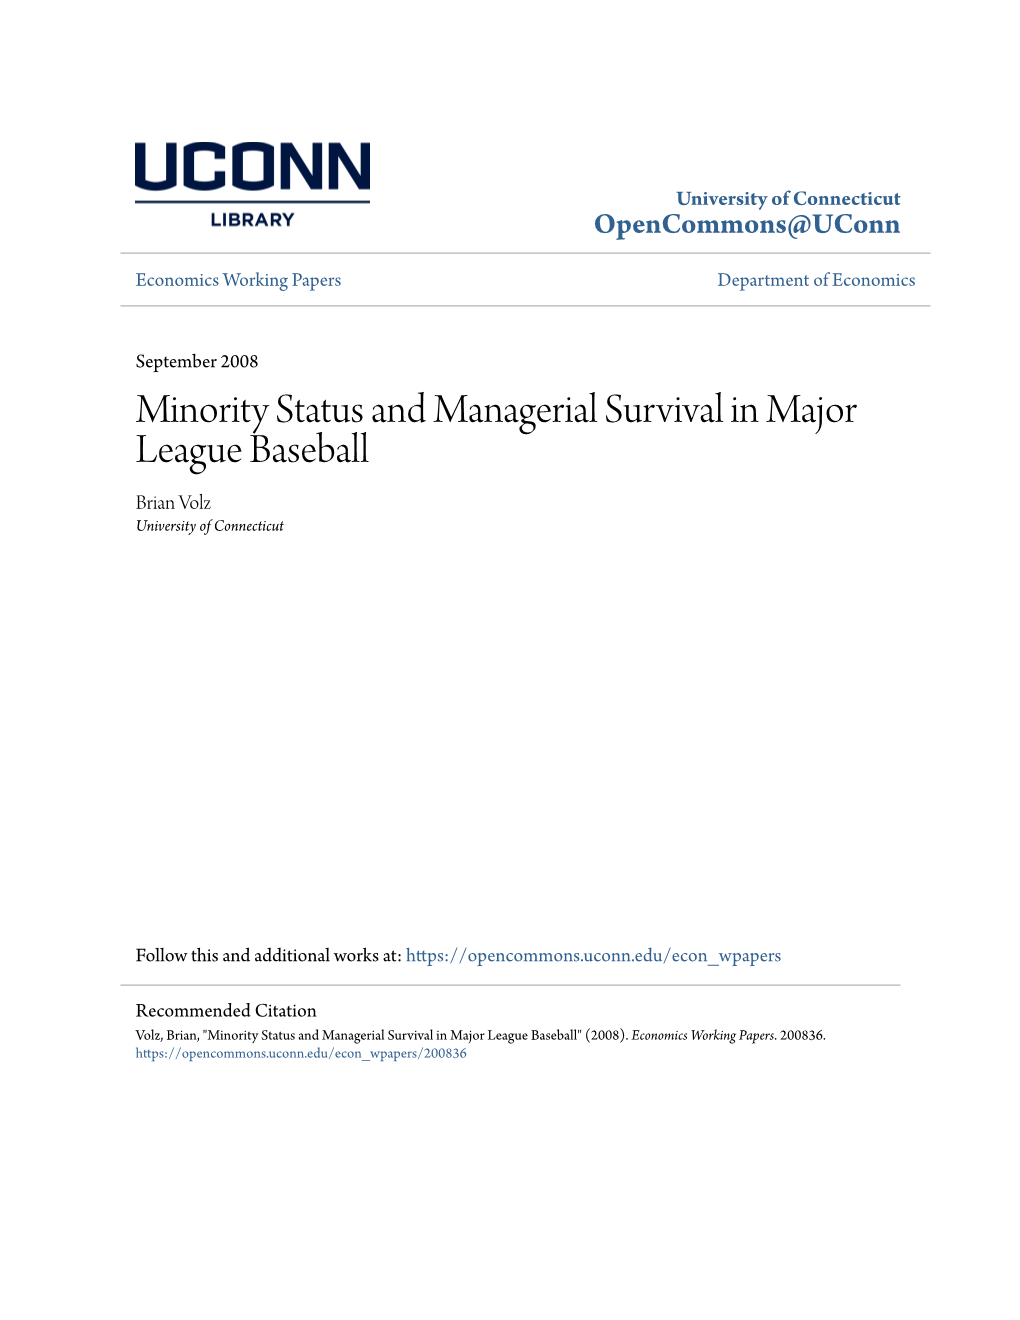 Minority Status and Managerial Survival in Major League Baseball Brian Volz University of Connecticut